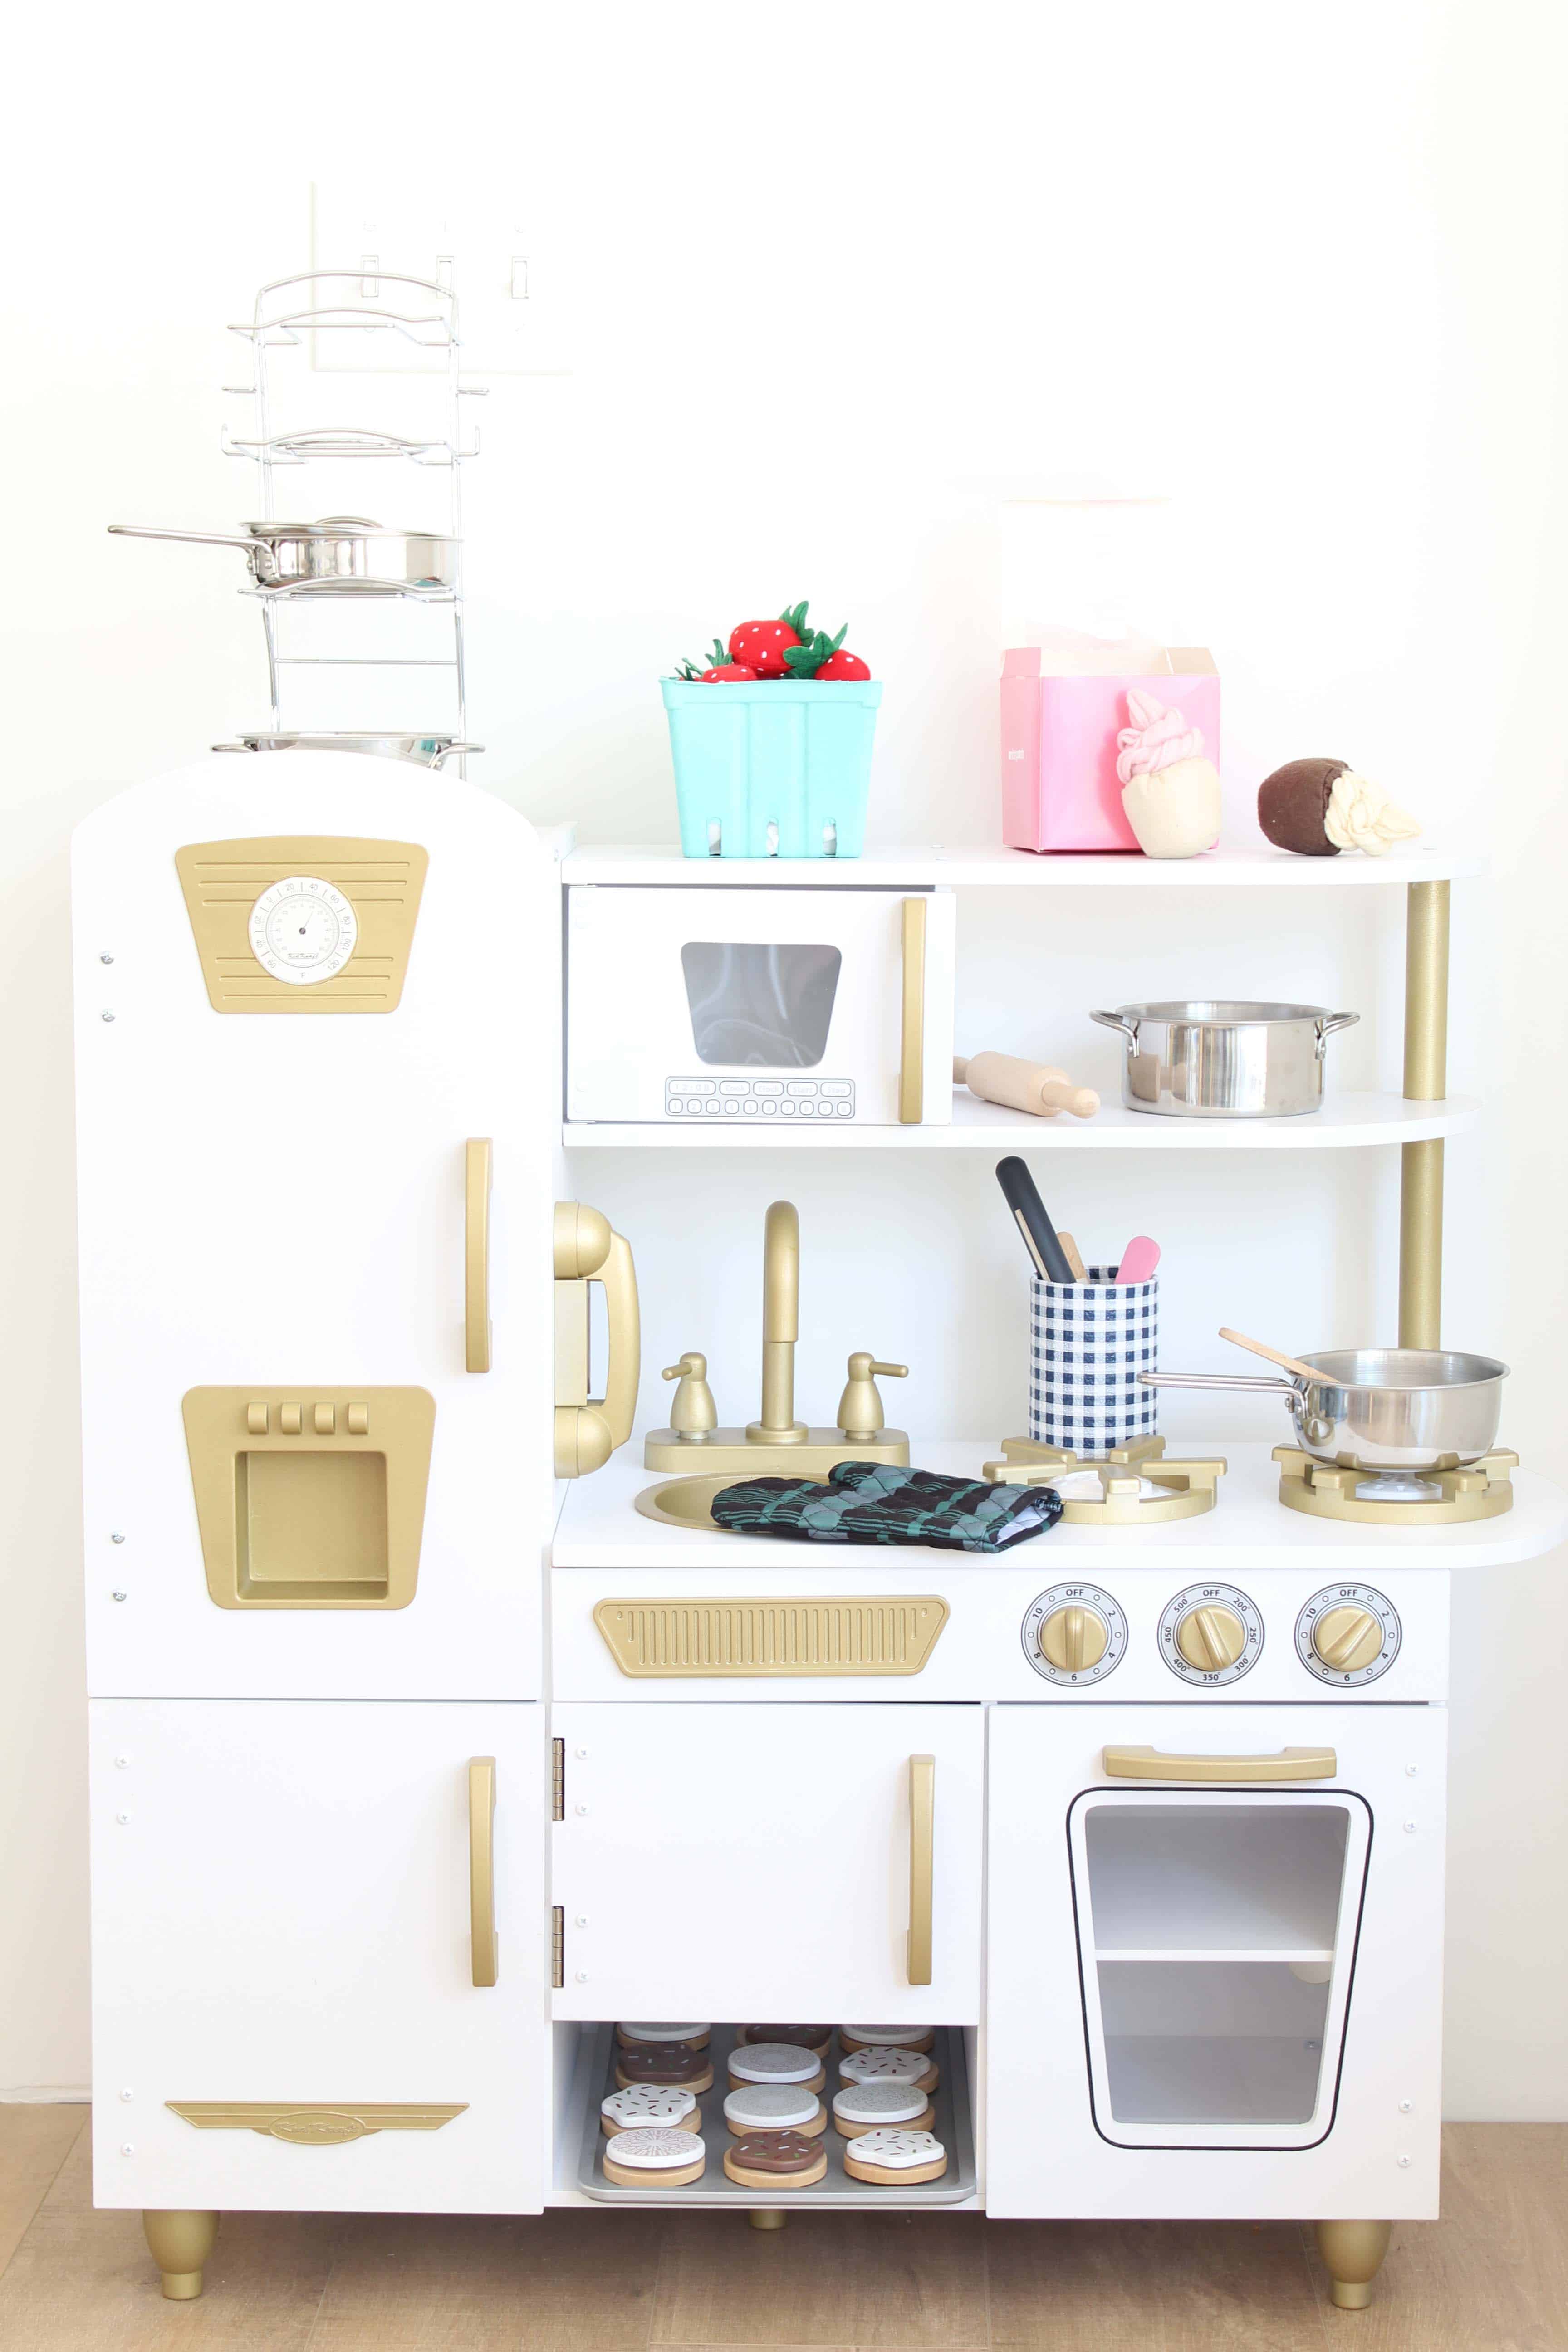 Play Kitchen Mini Makeover - A Nod to Navy